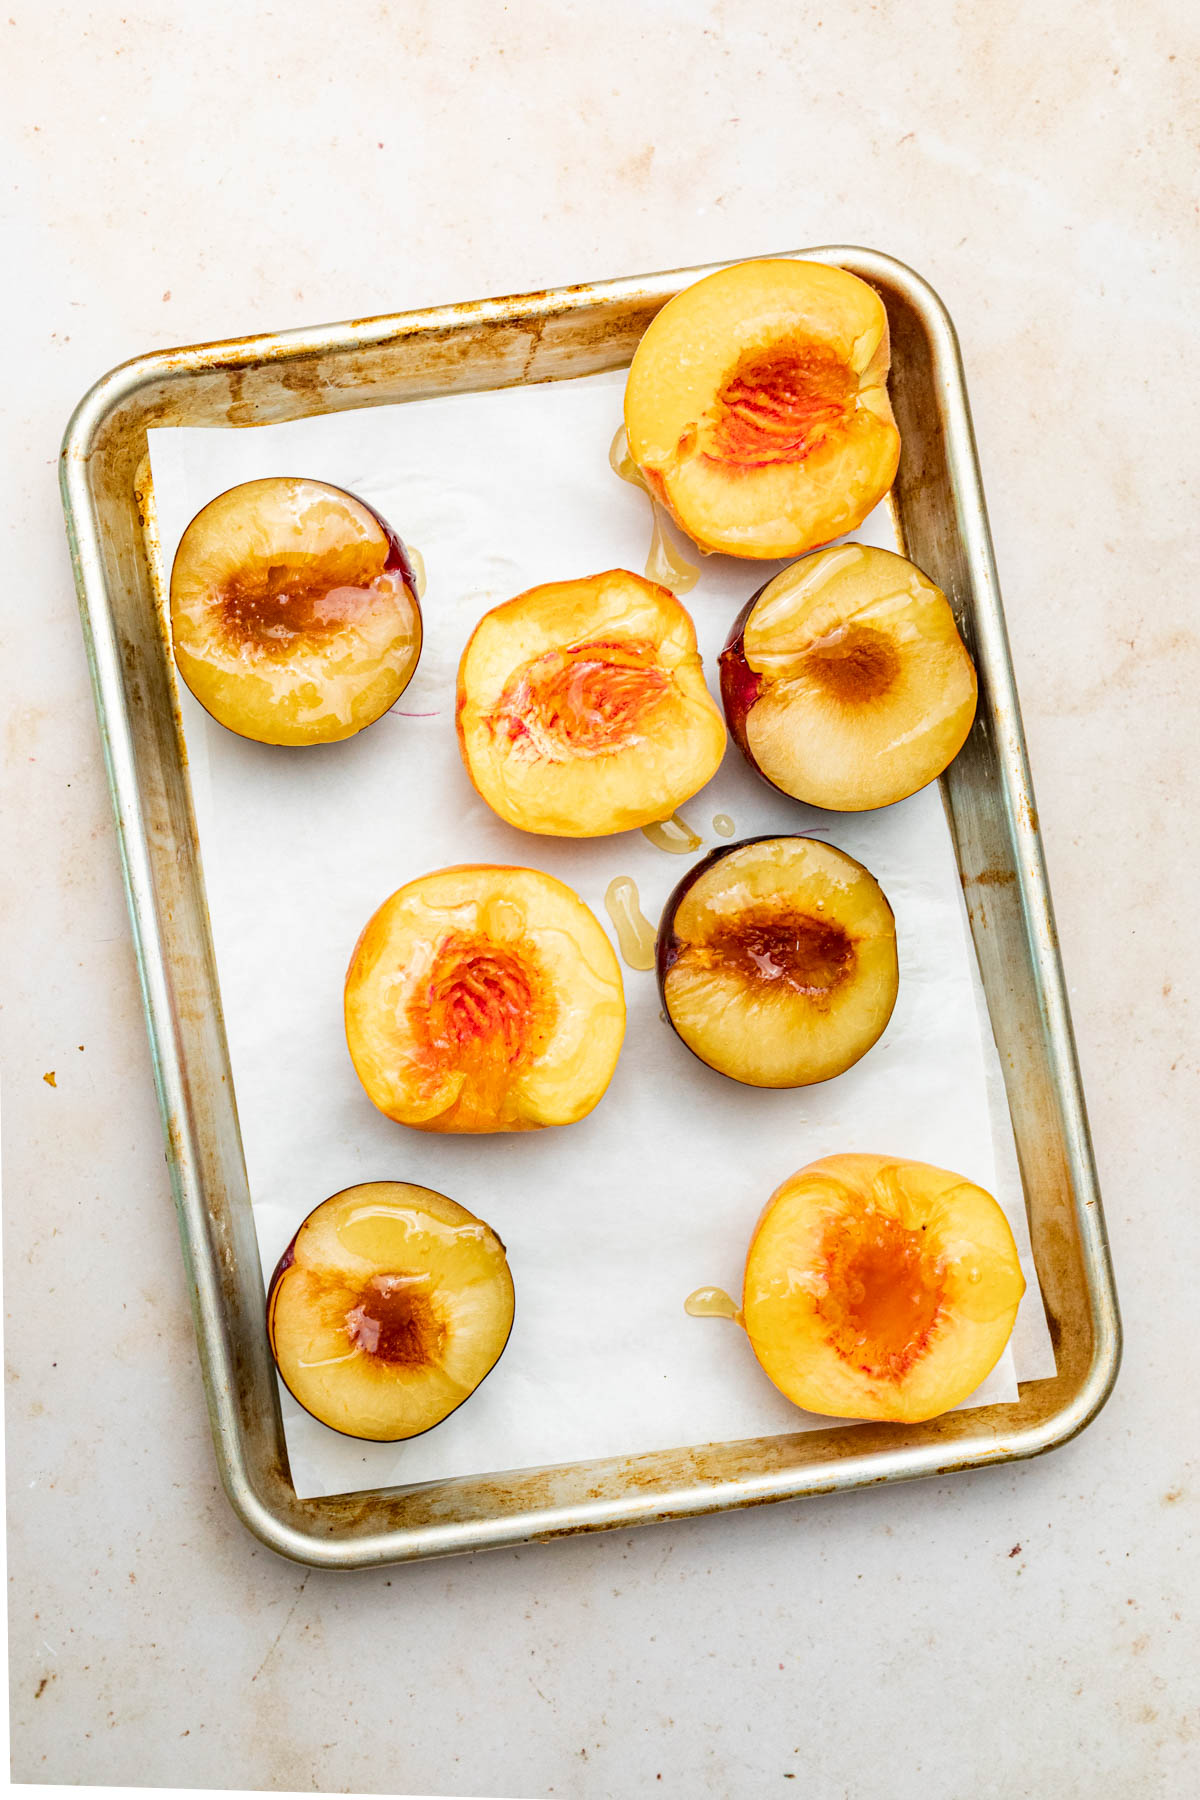 Halved peaches and plums drizzled with honey on a baking sheet.